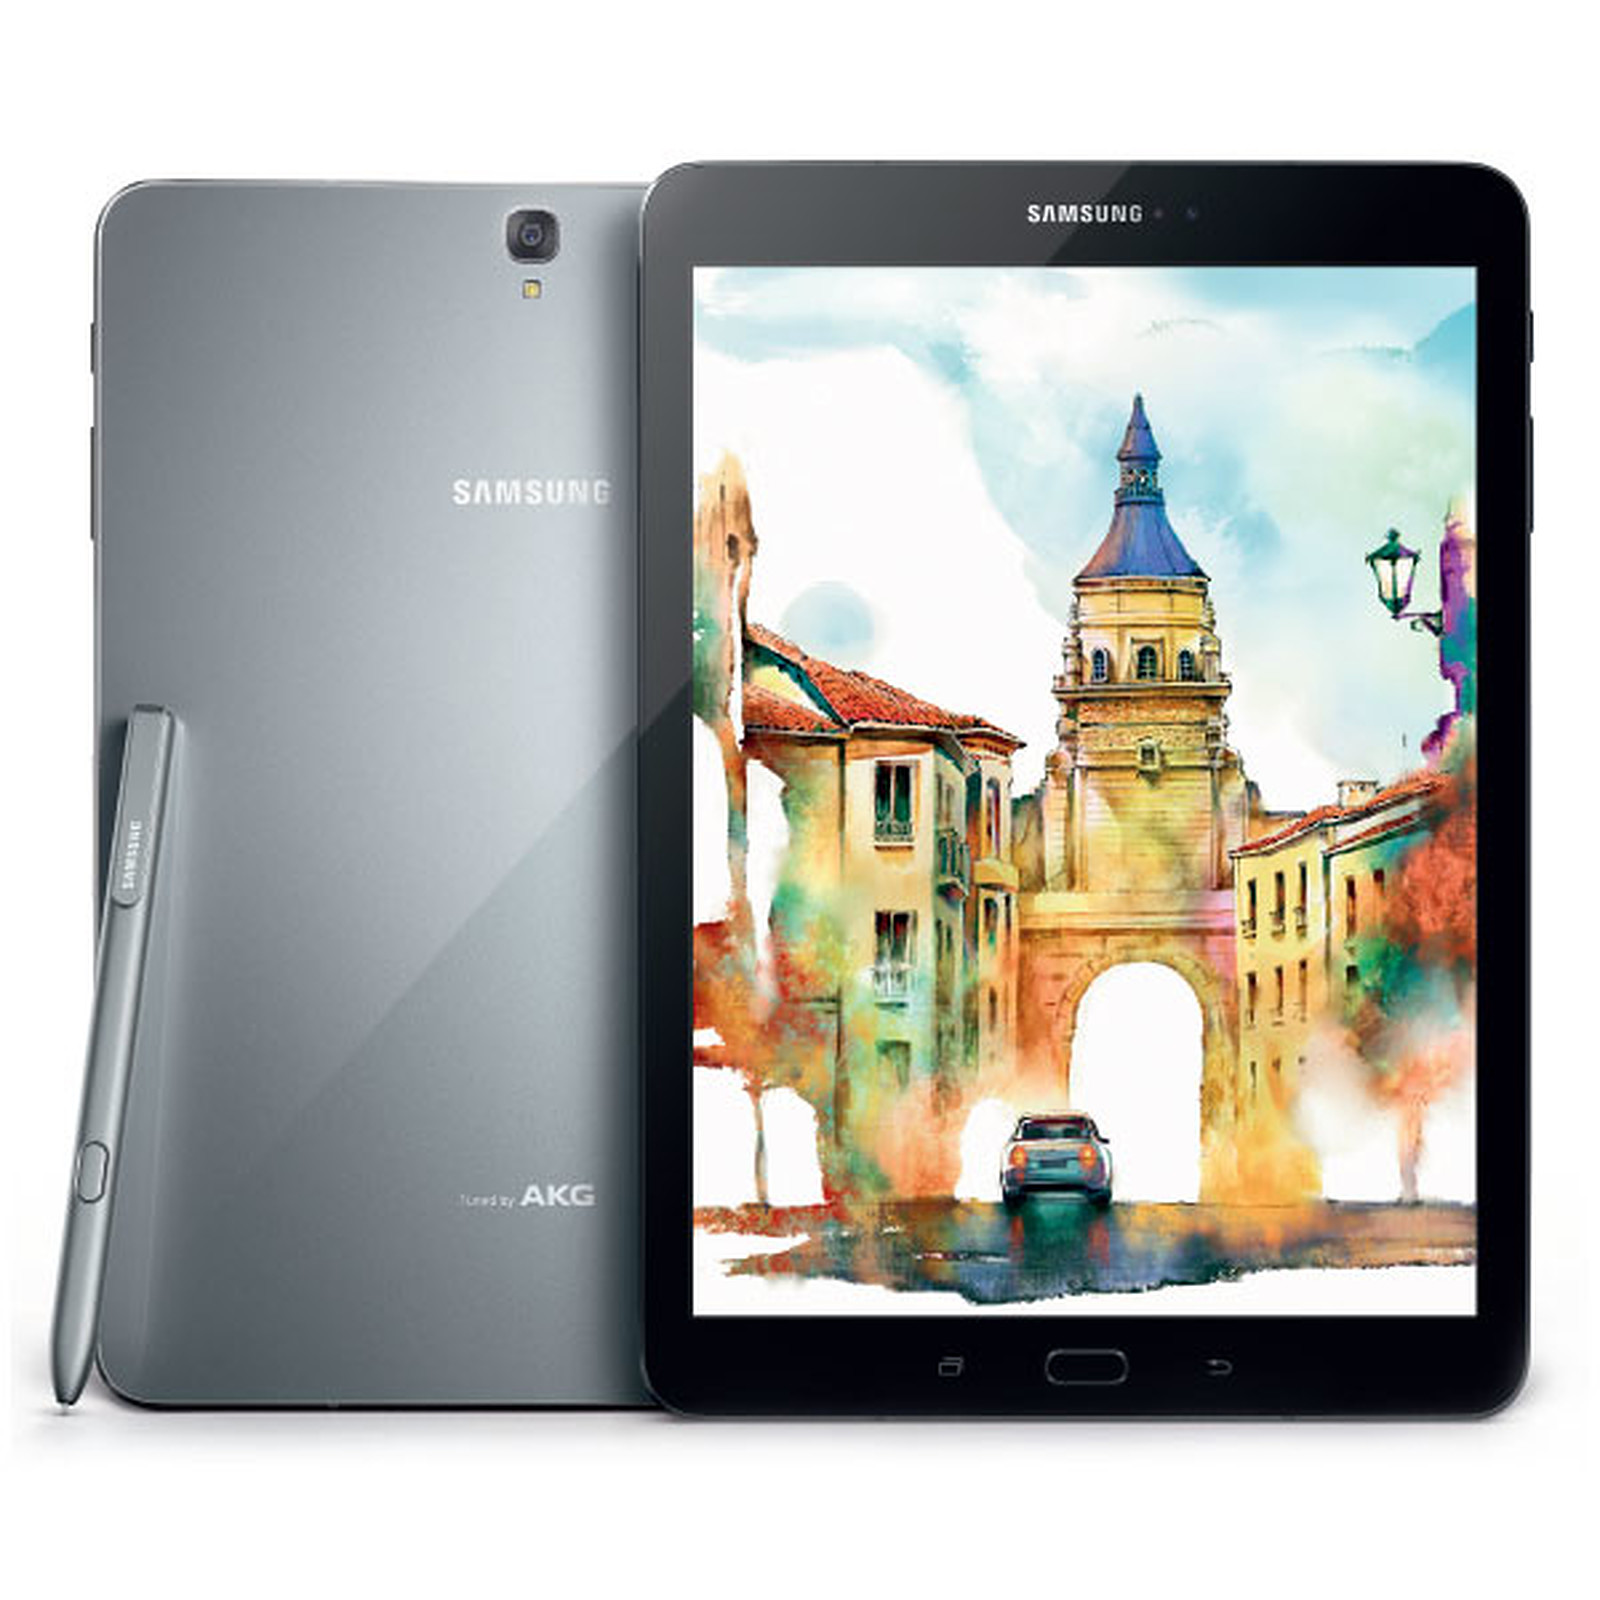 Samsung Galaxy Tab S3 9.7" SM-T825 32 Go Argent · Reconditionne - Tablette tactile Samsung